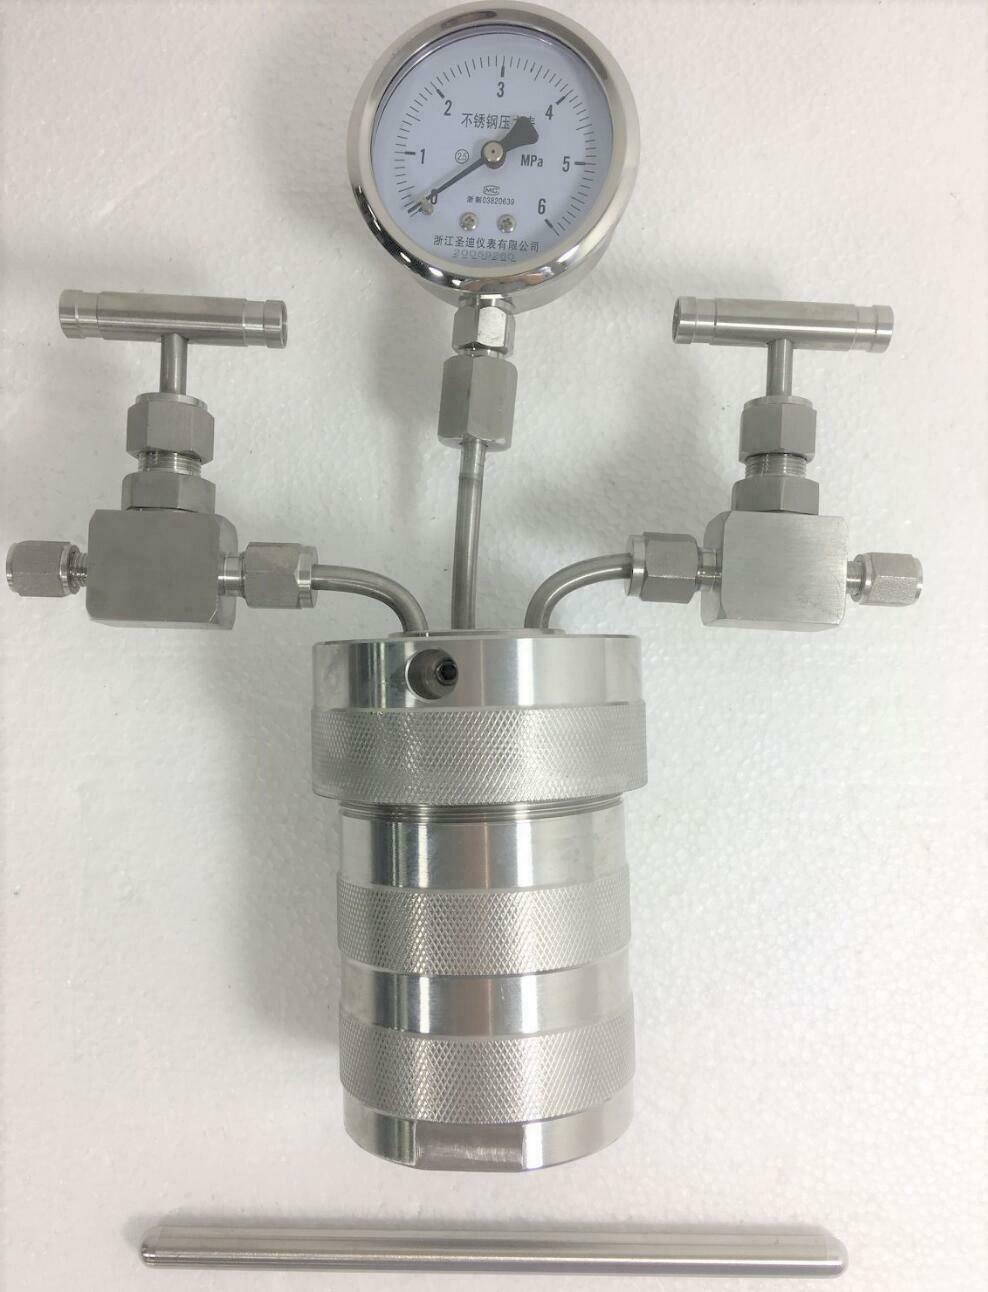 Hydrothermal synthesis Autoclave Reactor vessel+inlet outlet gauge 100ml 6Mpa N